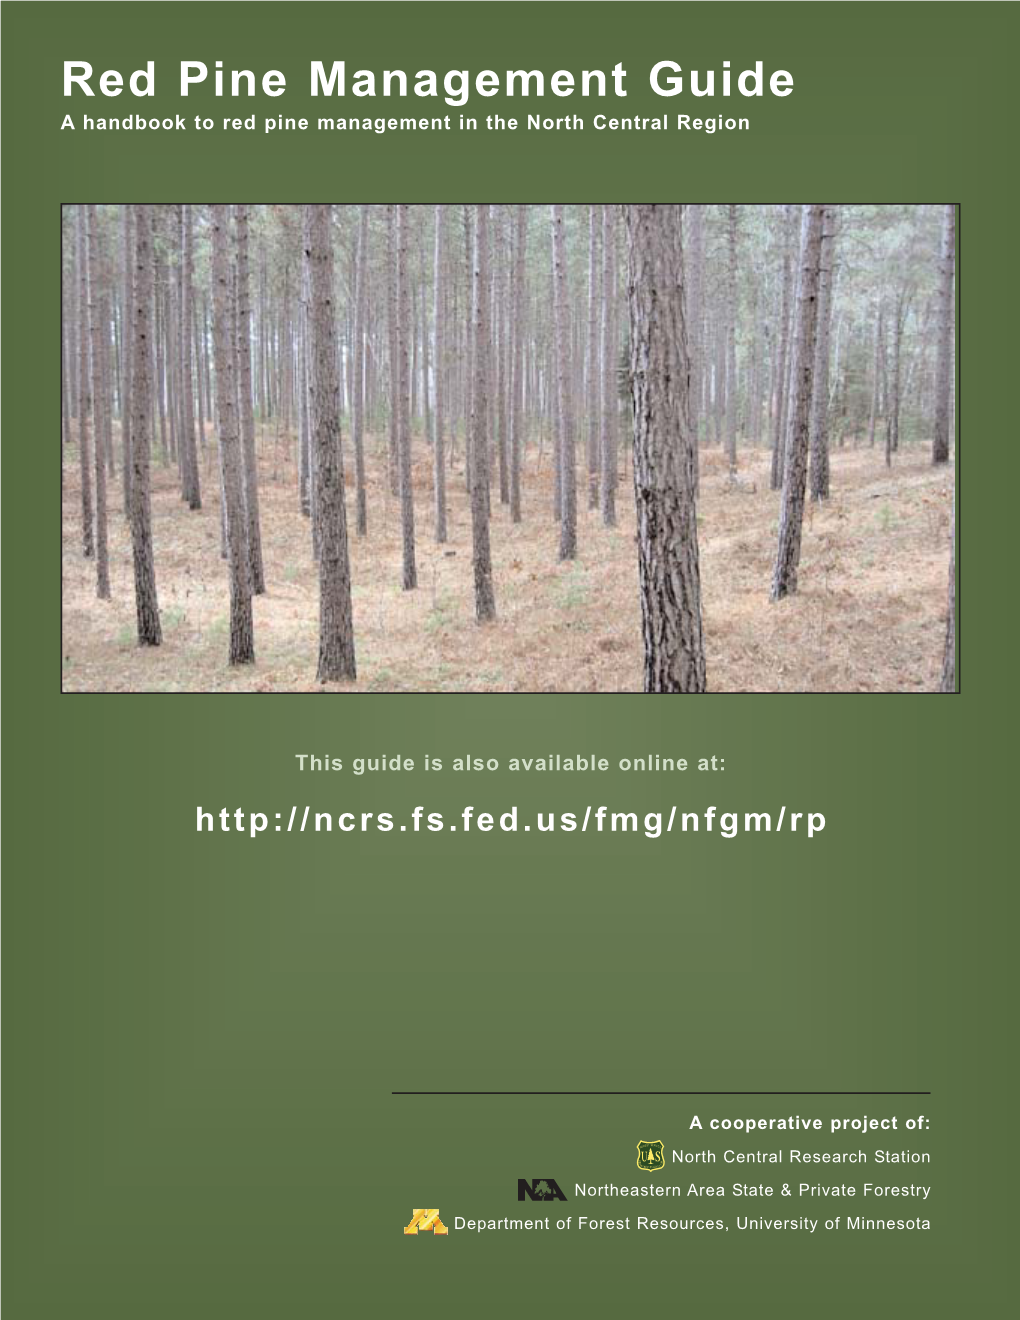 View Or Print PDF Version of the Forest